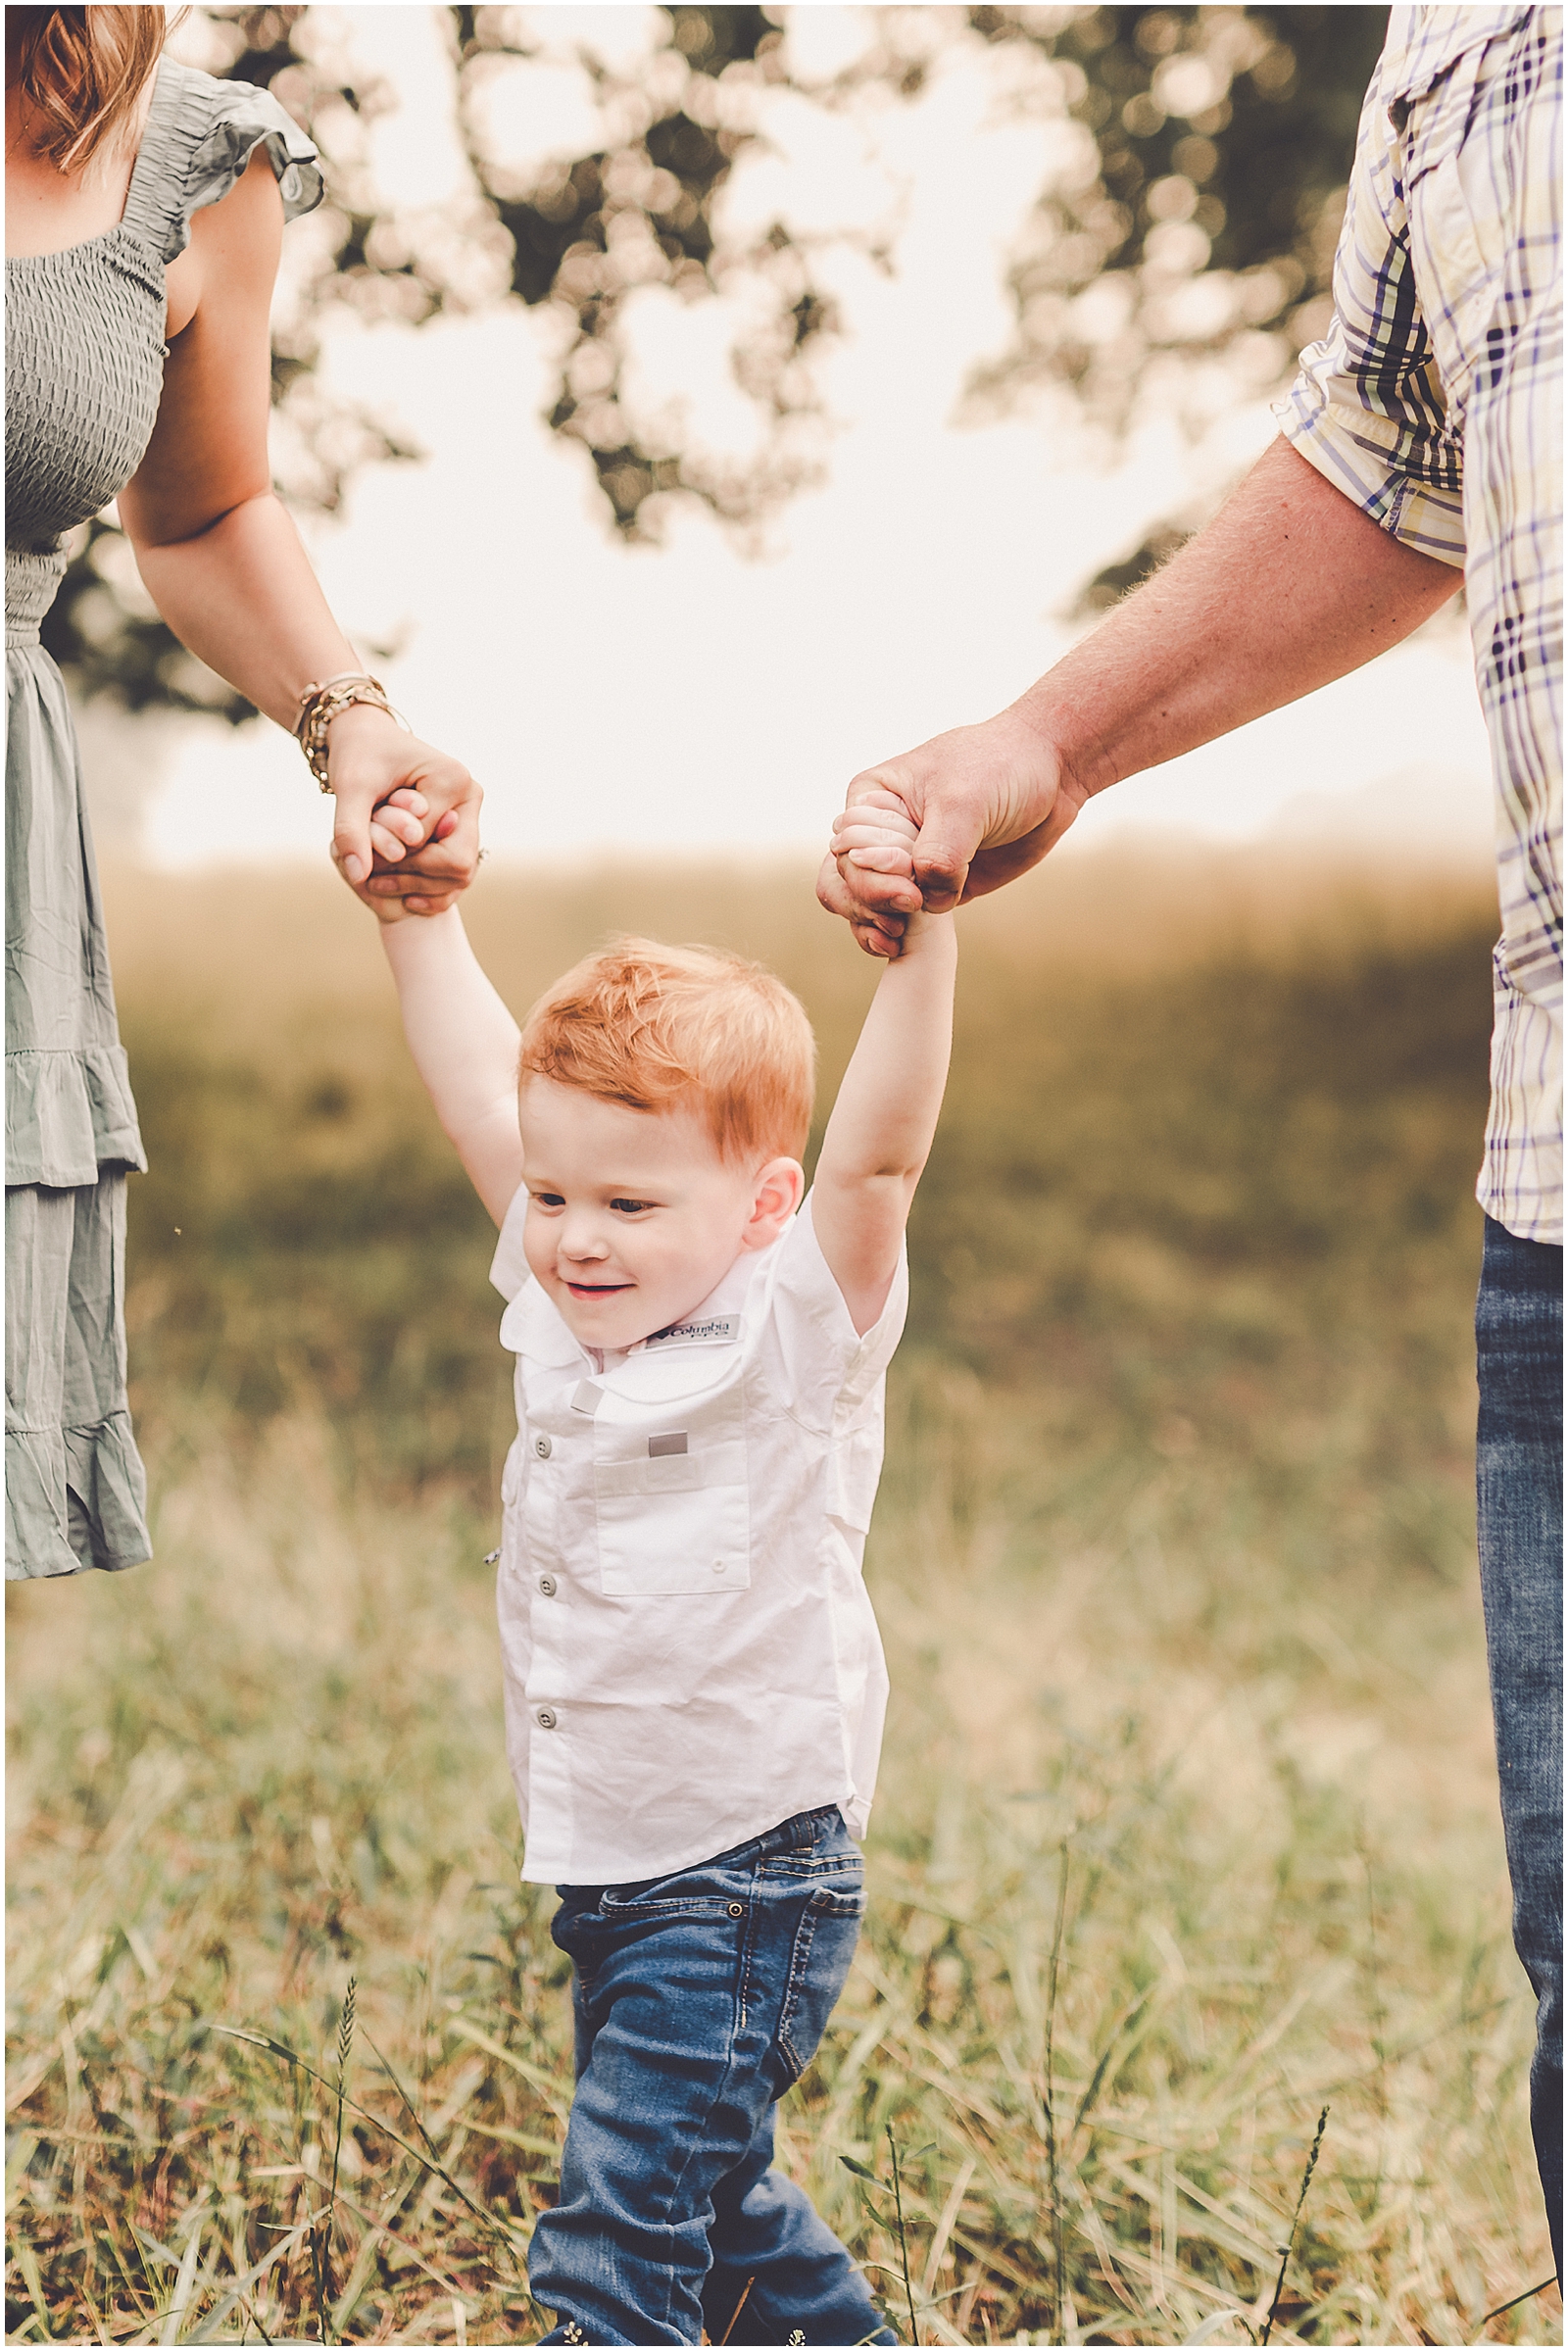 Summer farm family session in Watseka with the Wessels family and Kankakee County family photographer Kara Evans Photographer.